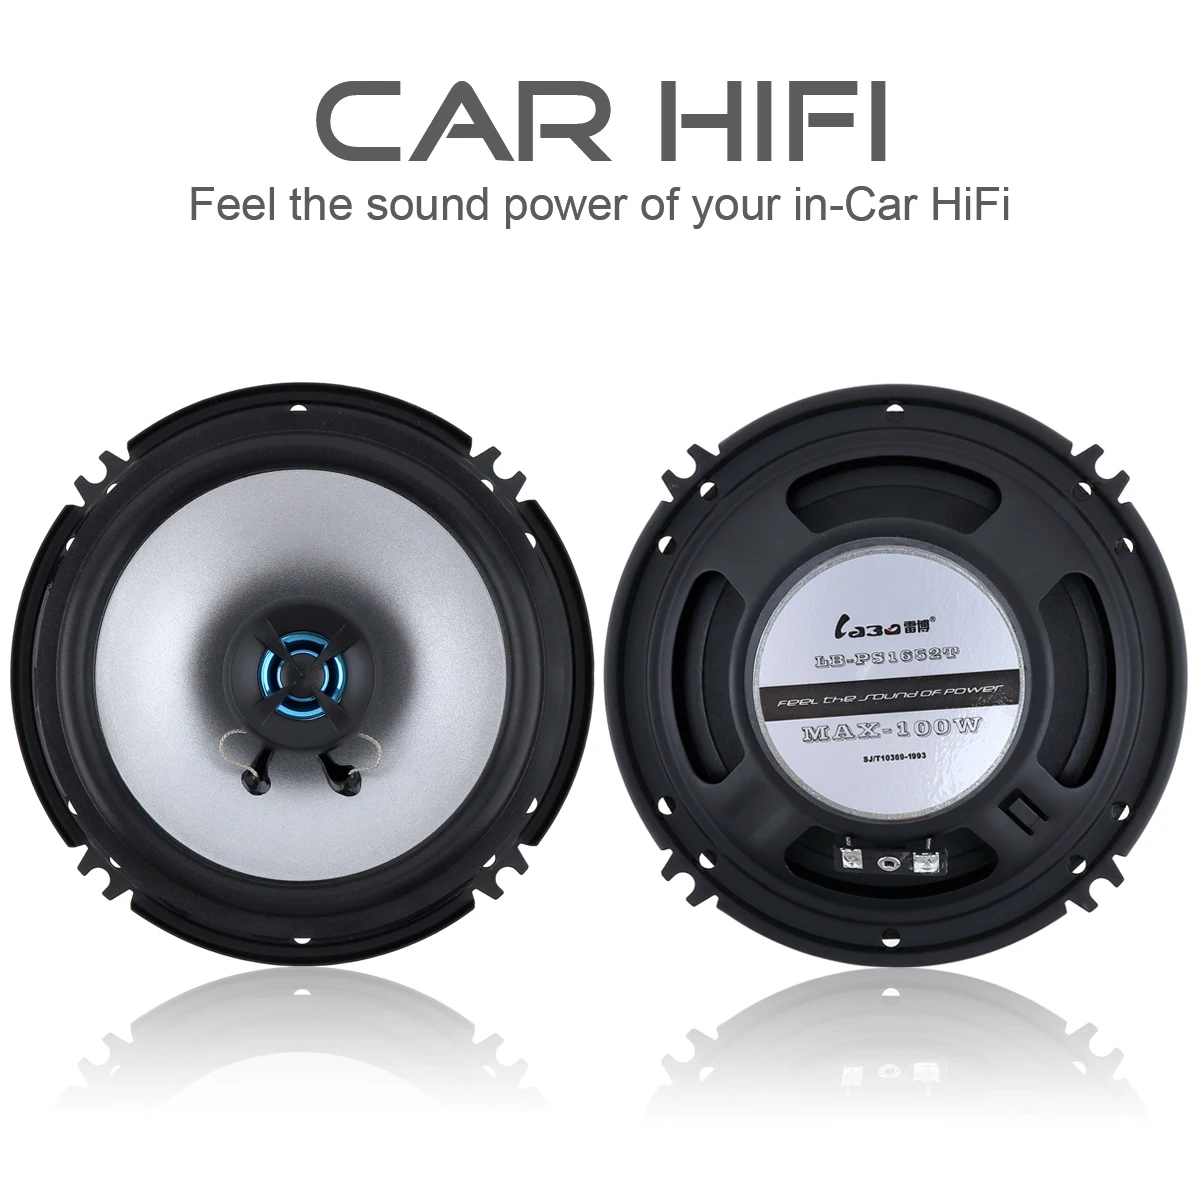 2pcs LB-PS1652T 100W 2 Way Car Coaxial Vehicle Door Auto Audio Music Stereo Full Range Frequency Hifi Speakers 2pcs ts a1647s 6 5 inch car hifi coaxial speaker vehicle door auto audio music stereo full range frequency speakers for cars